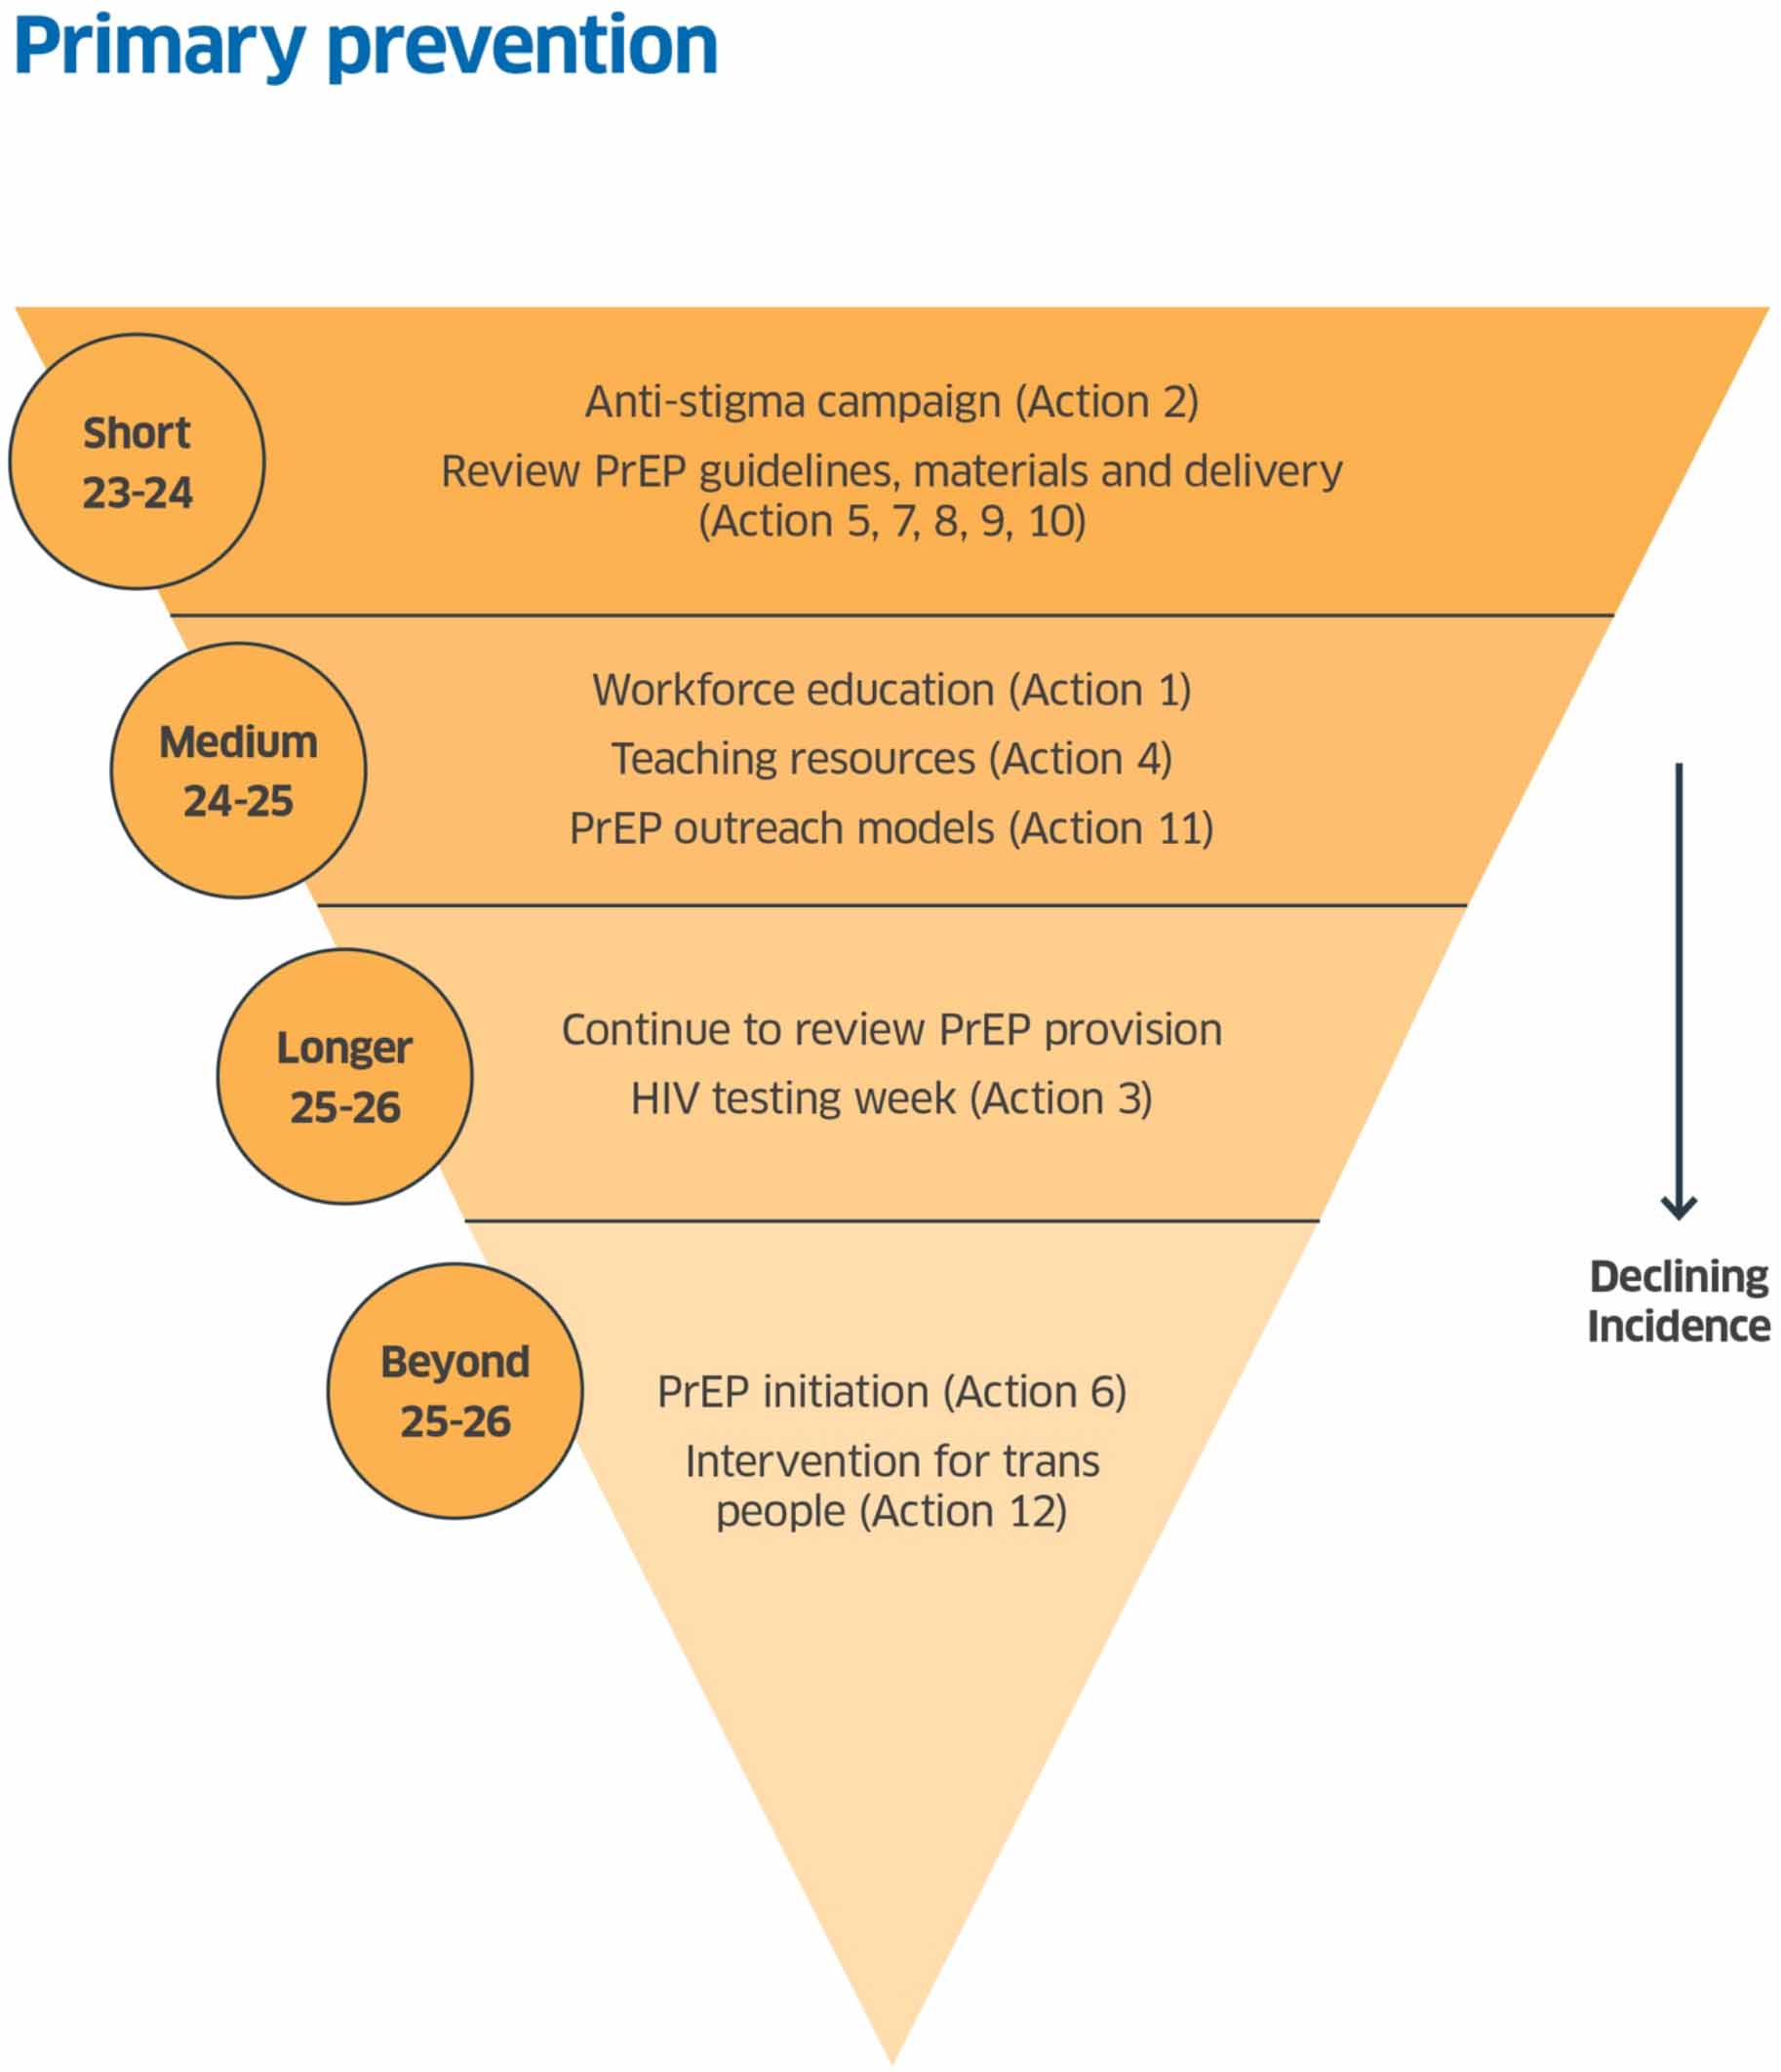 An inverted triangle showing the primary prevention actions for short, medium, longer and beyond 2025/26 and incidence decline